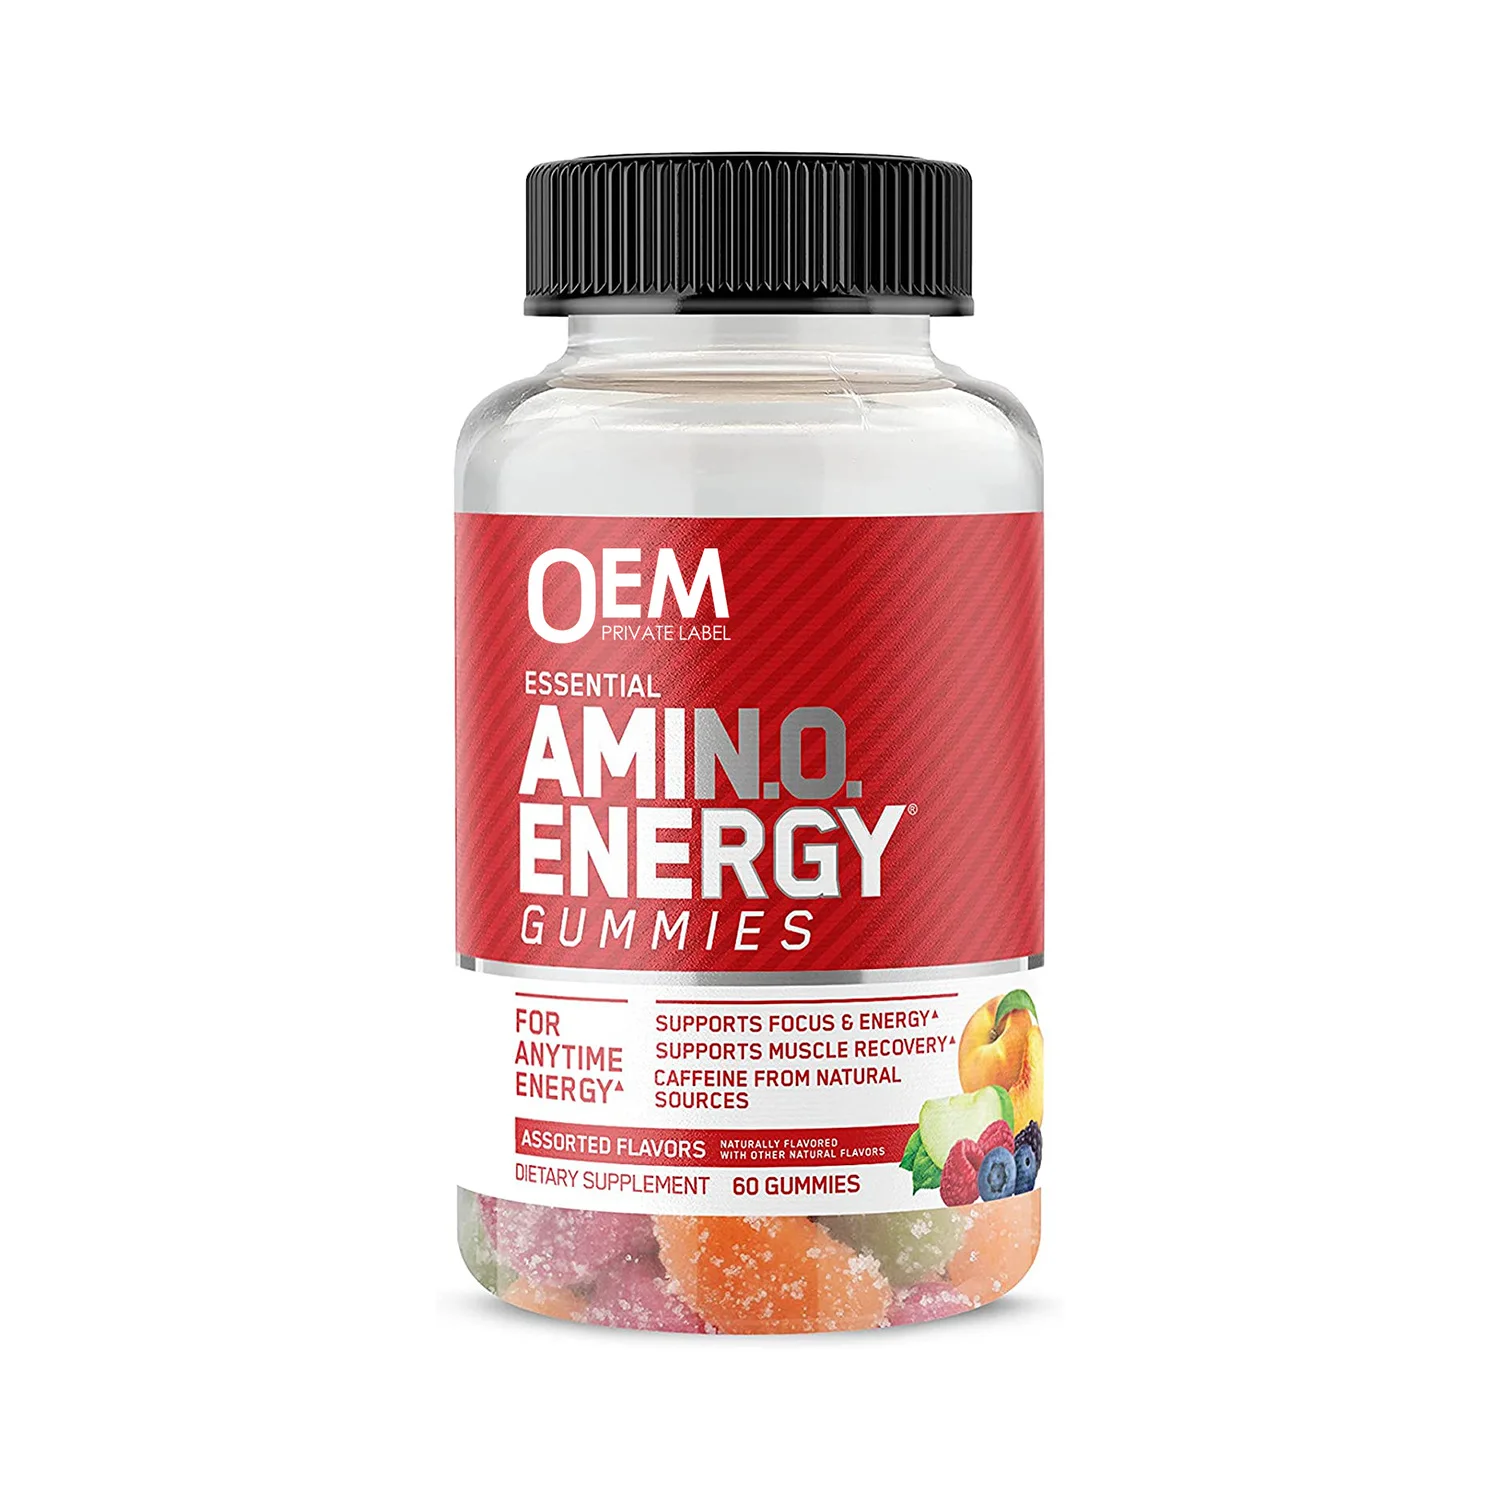 60 capsules of pre exercise amino acid energy jelly helps restore physical strength enhance immunity enhance protein